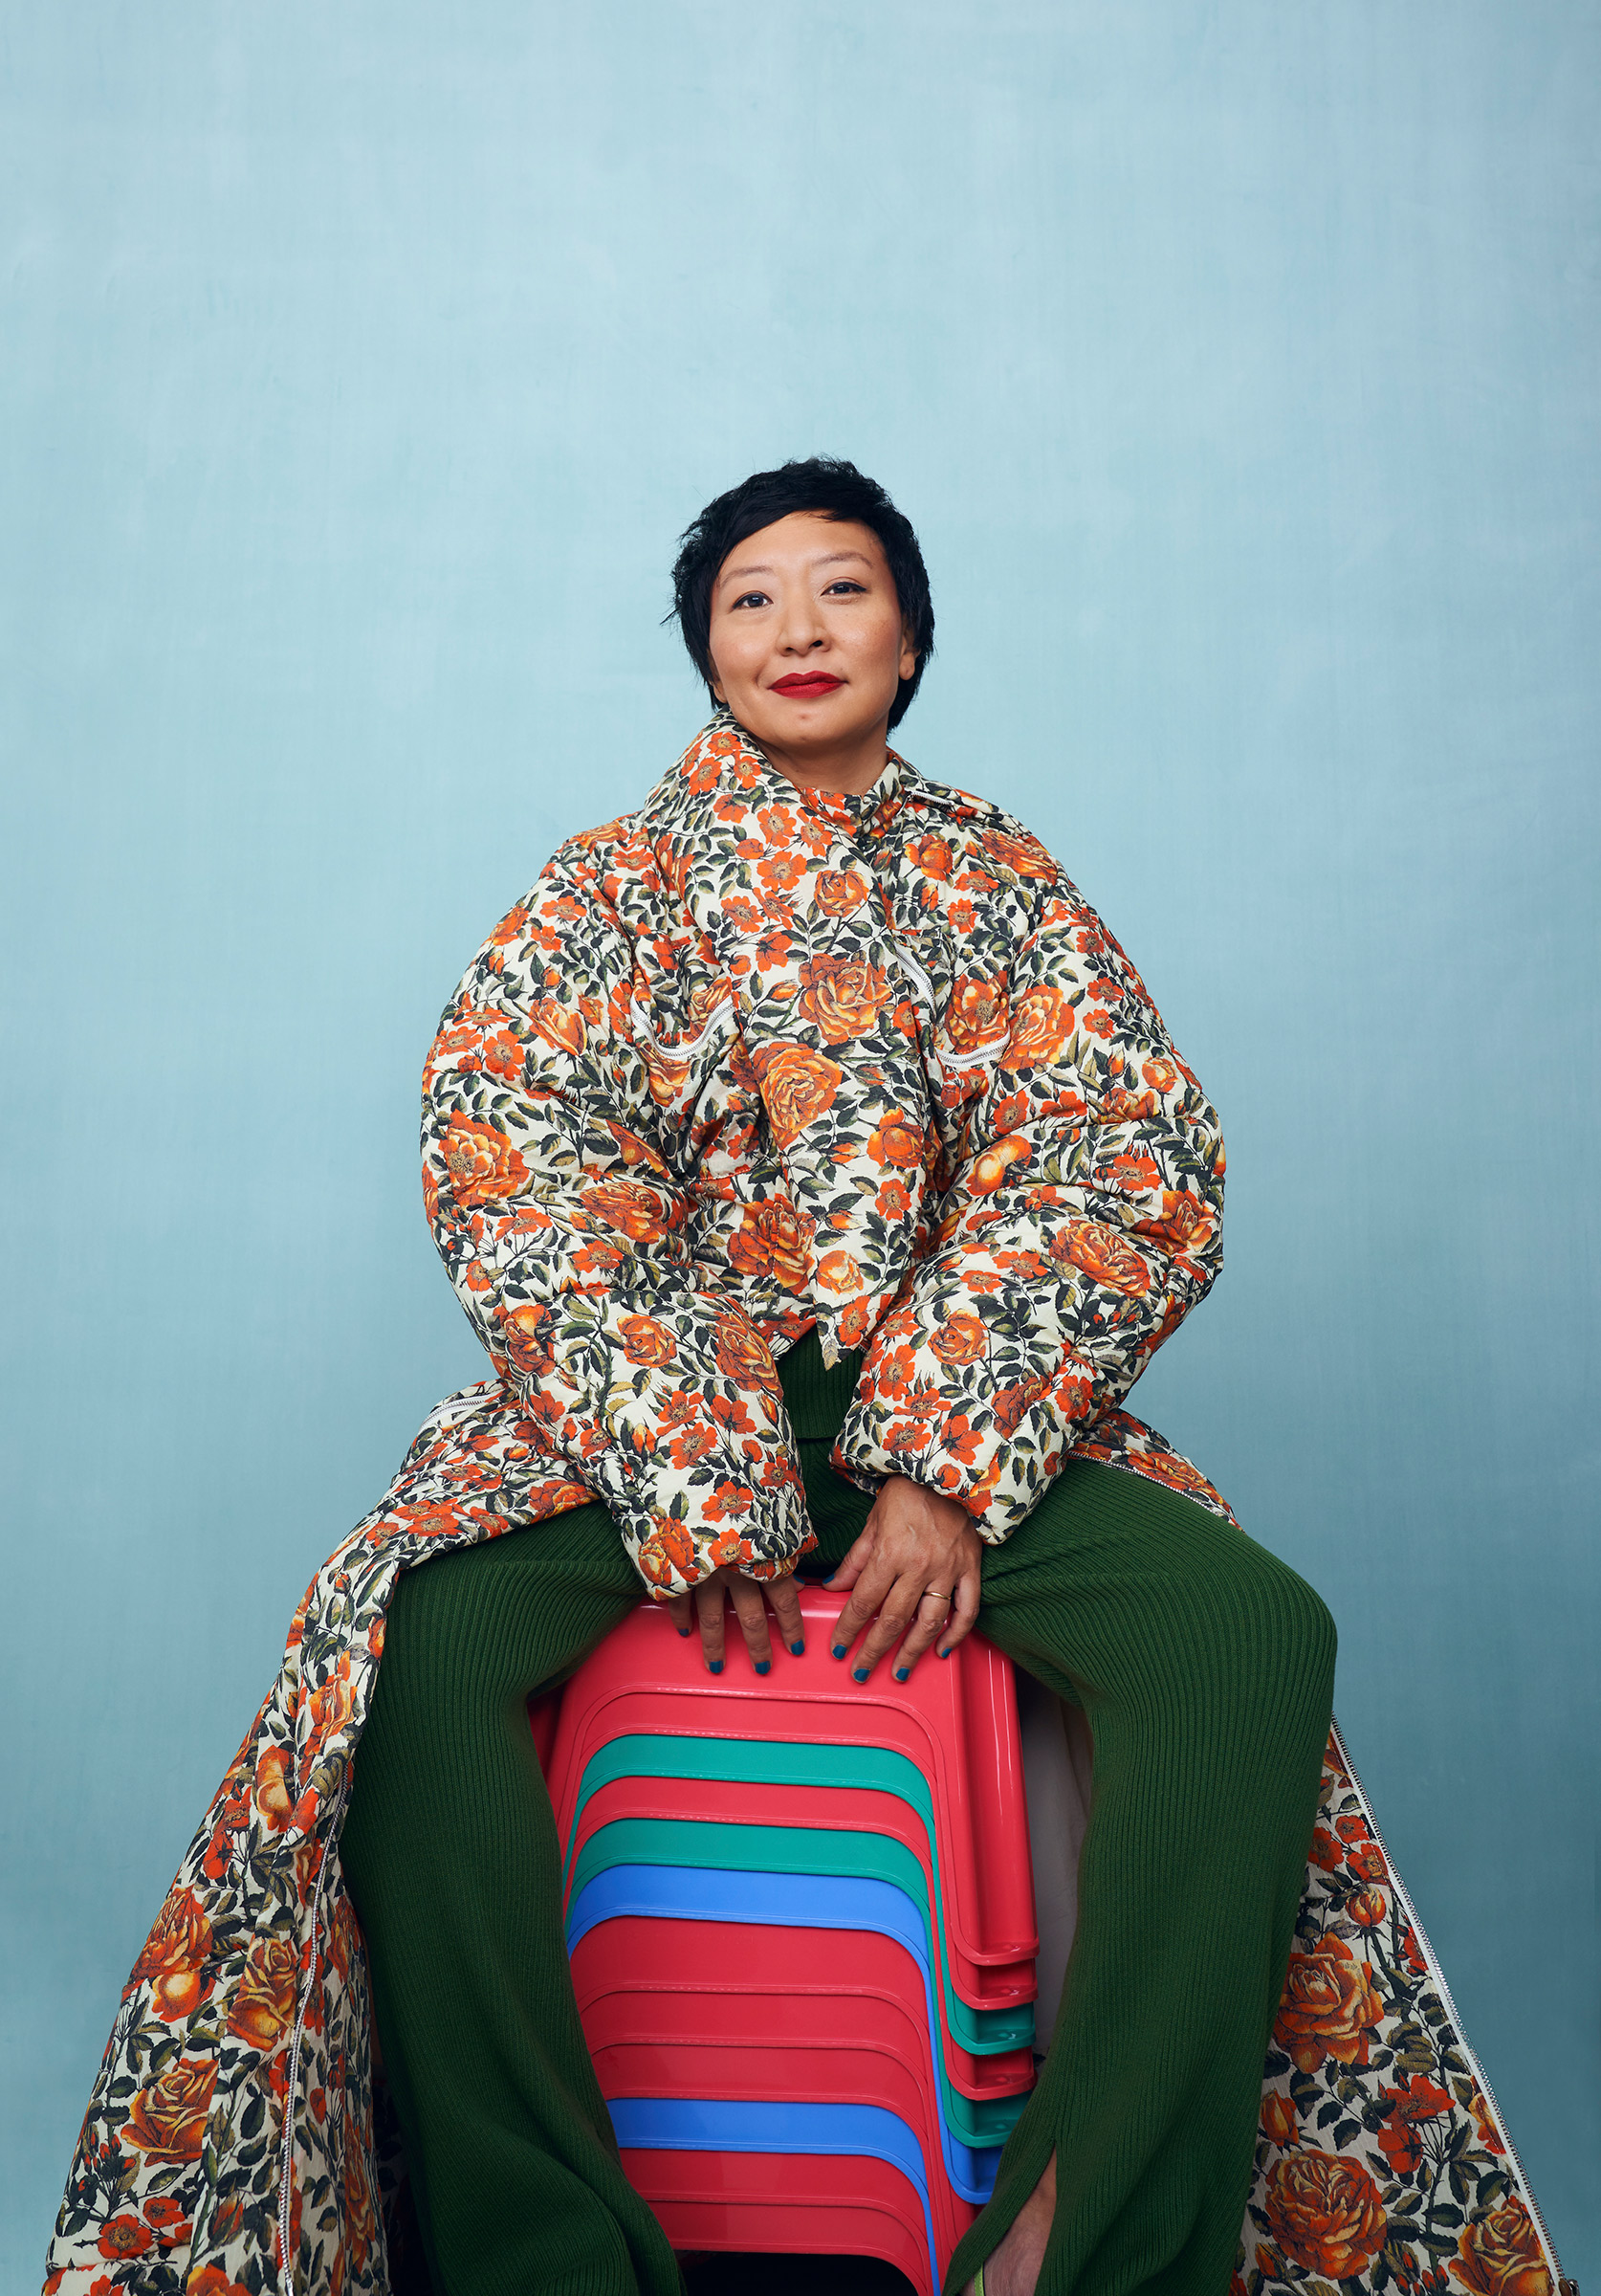 <strong>Cathy Park Hong</strong>. "<a href="https://time.com/collection/100-most-influential-people-2021/6096088/cathy-park-hong/">The 100 Most Influential People</a>," Sept. 27 issue. (Michelle Watt for TIME)